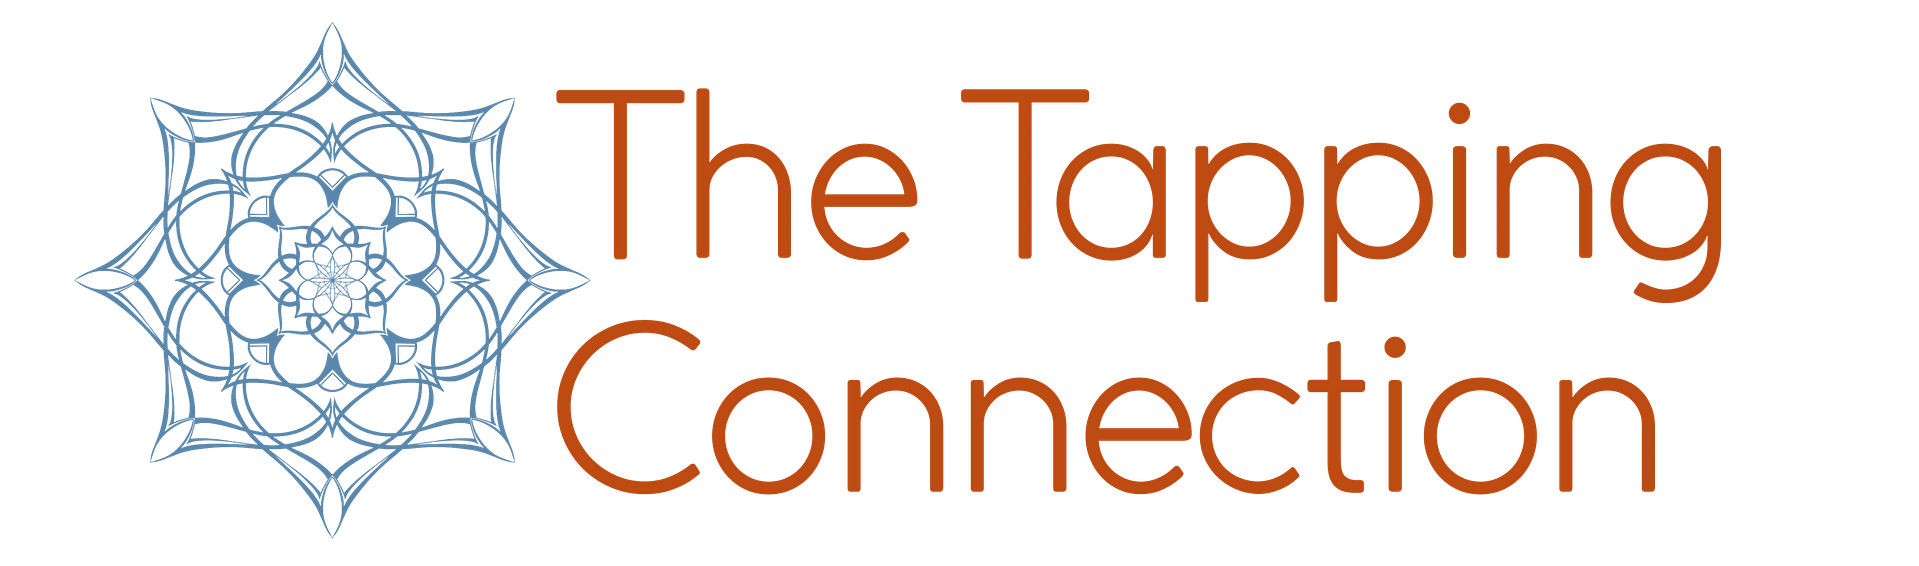 The Tapping Connection logo, EFT Tapping